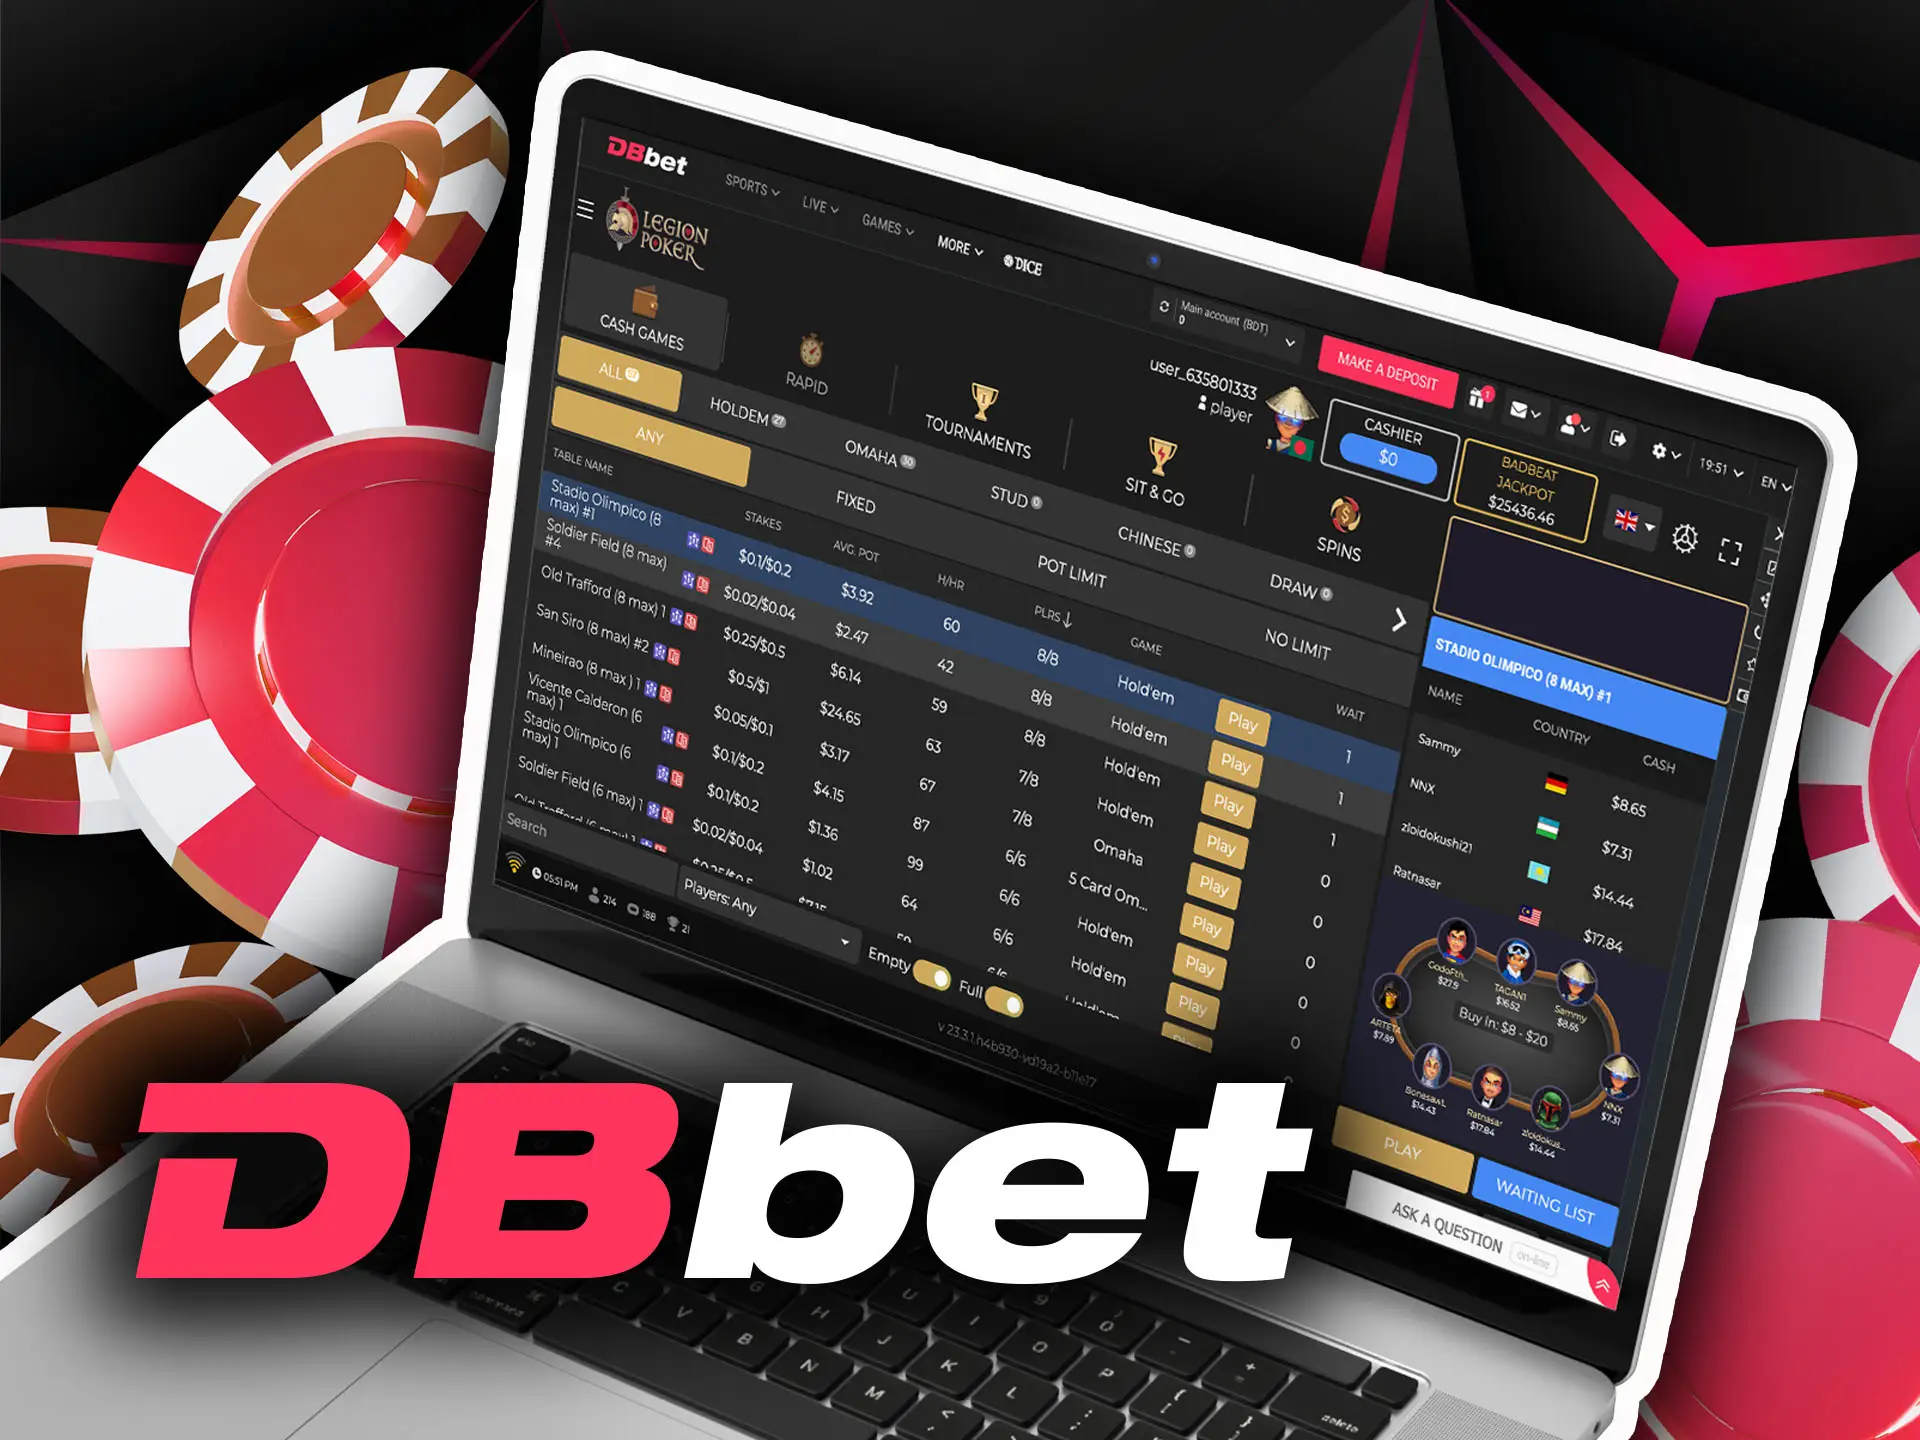 Play poker games in the DBbet casino.